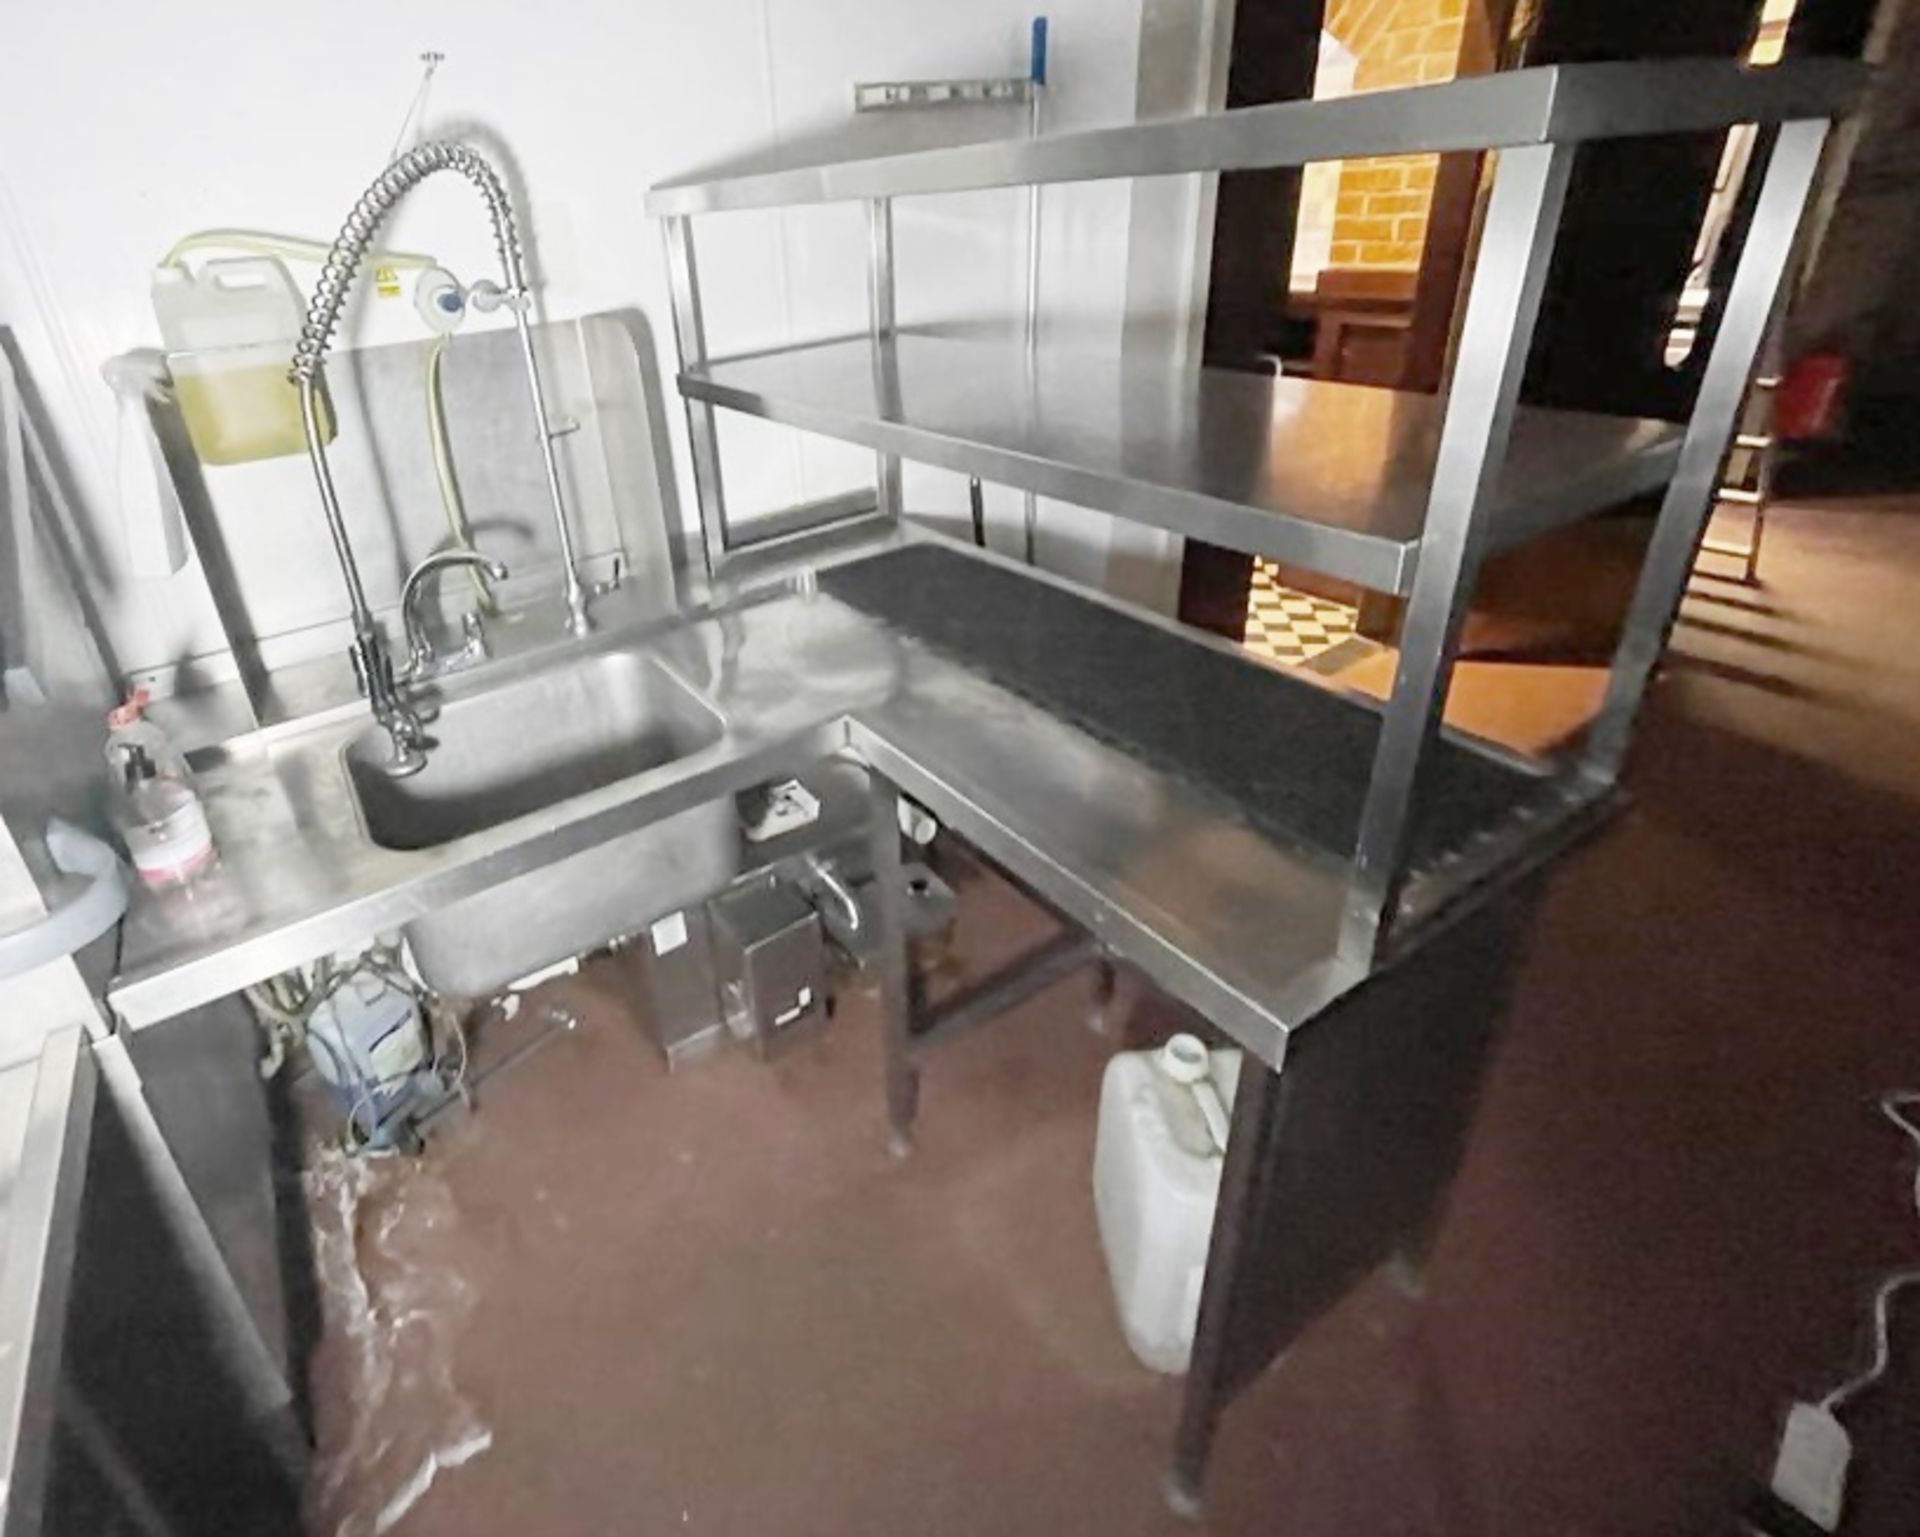 1 x Winterhalter PT-M Passthrough Dishwasher With Inlet and Outlet Table With Wash Basin and Spray - Image 3 of 15